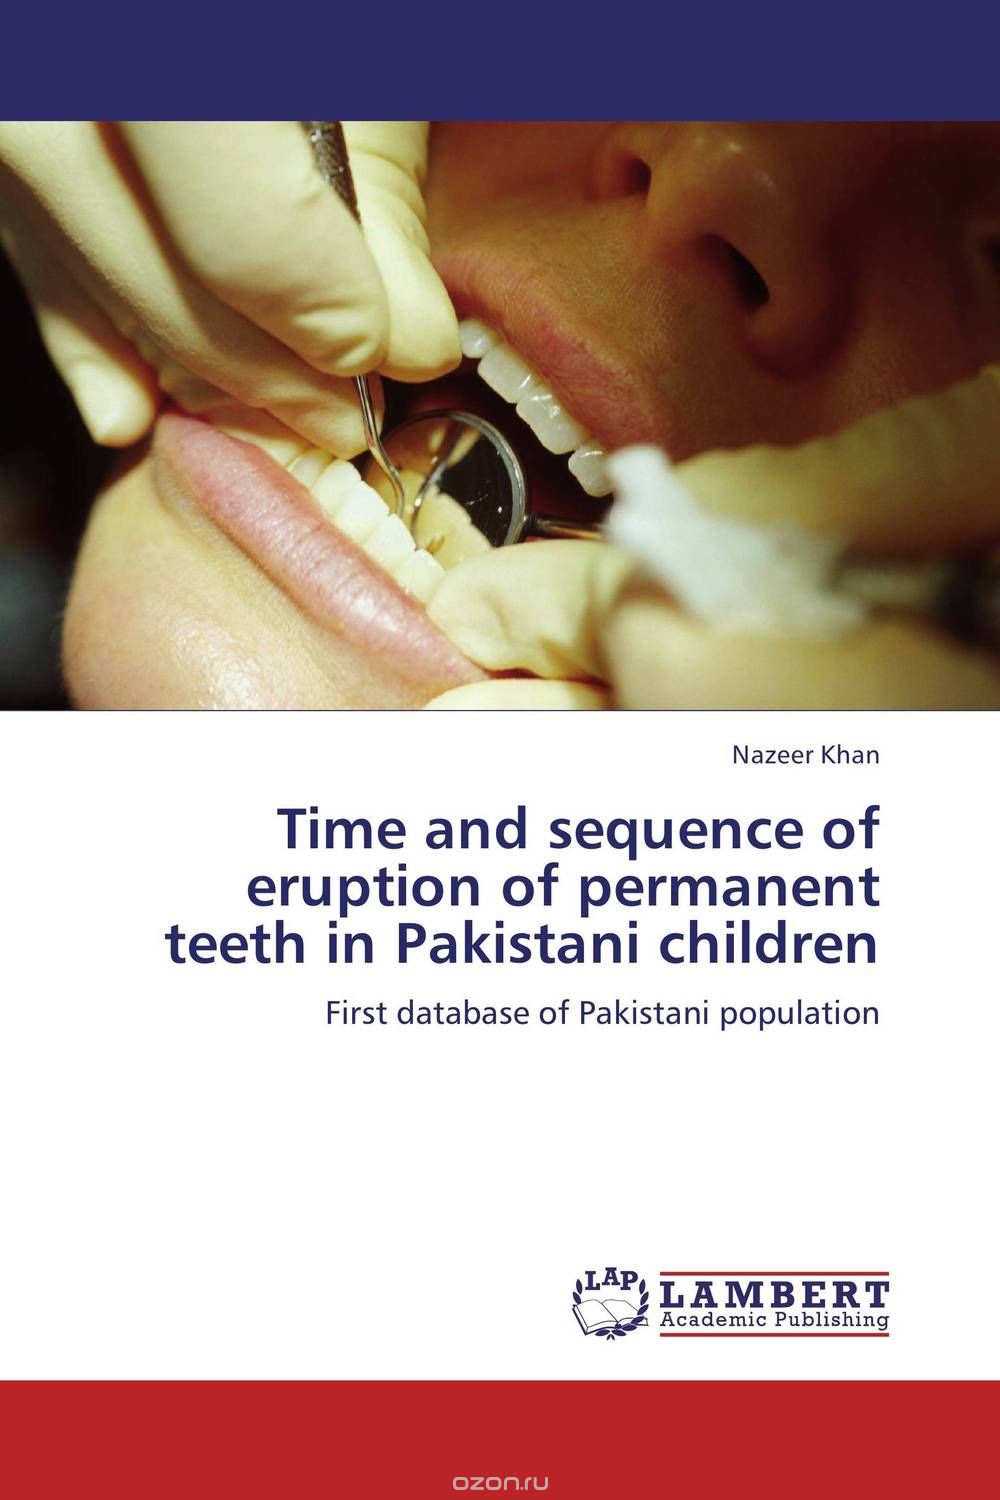 Time and sequence of eruption of permanent teeth in Pakistani children